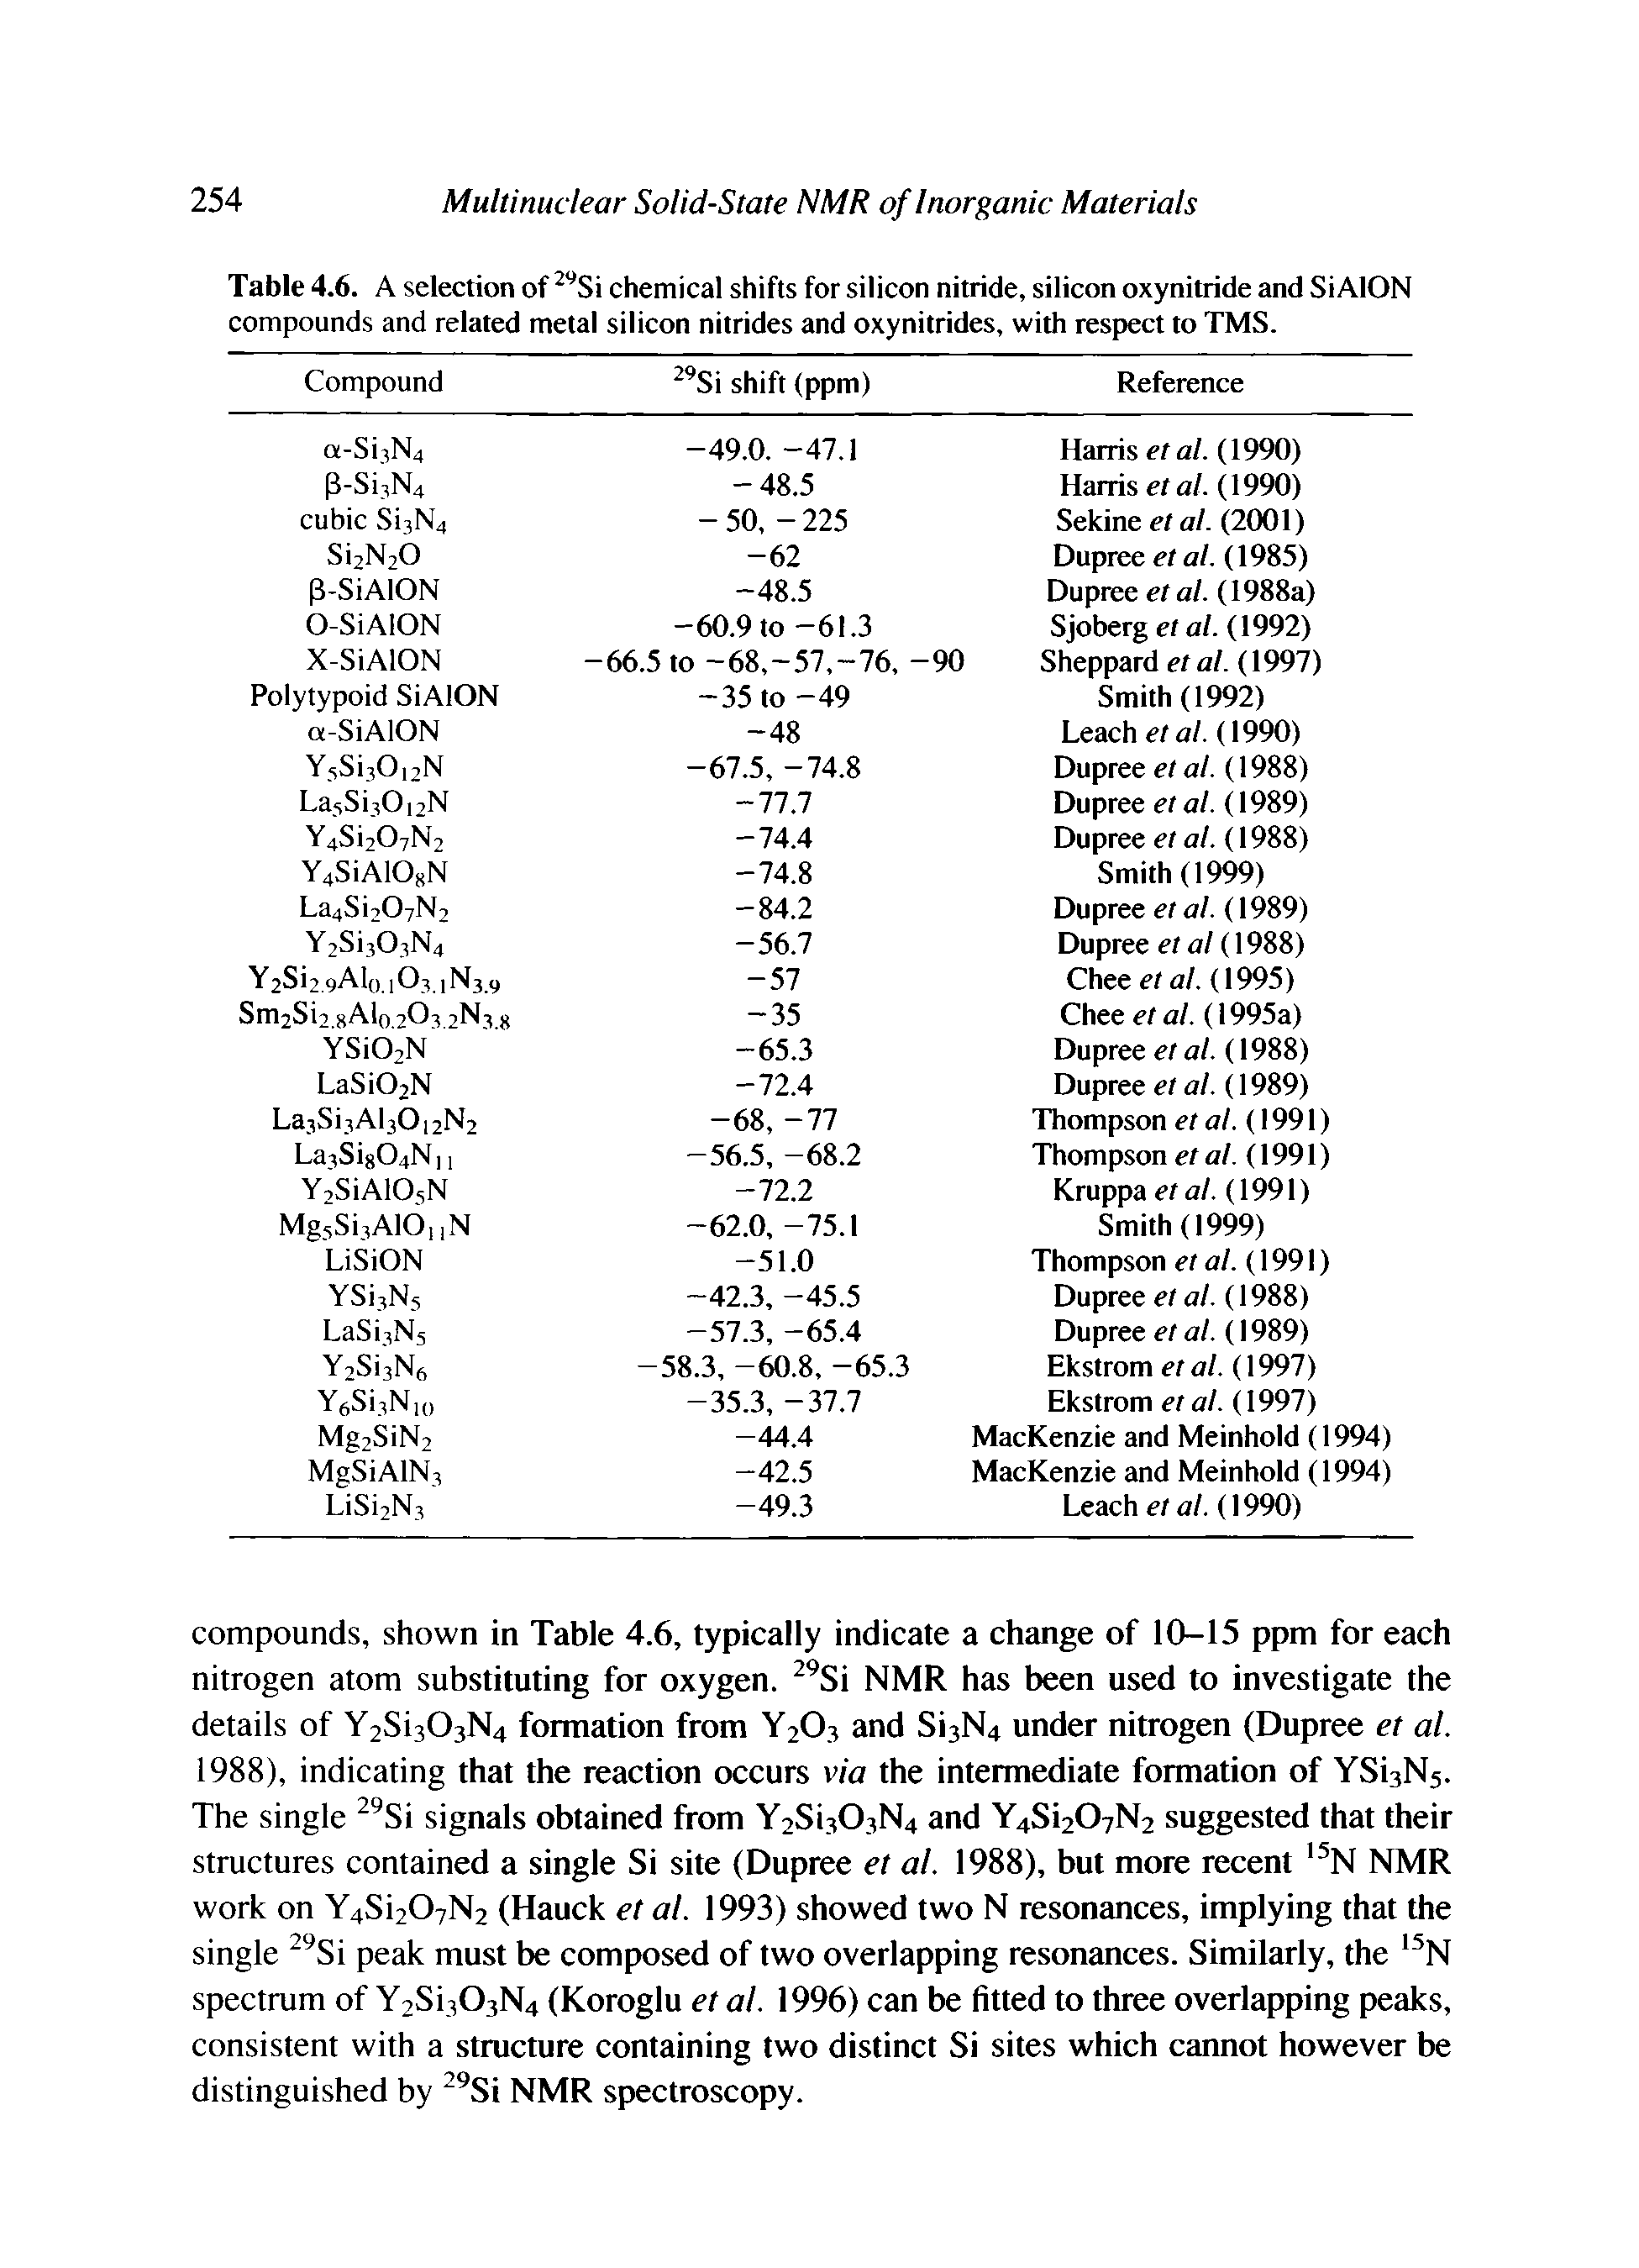 Table 4.6. A selection of chemical shifts for silicon nitride, silicon oxynitride and SiAION compounds and related metal silicon nitrides and oxynitrides, with respect to TMS.